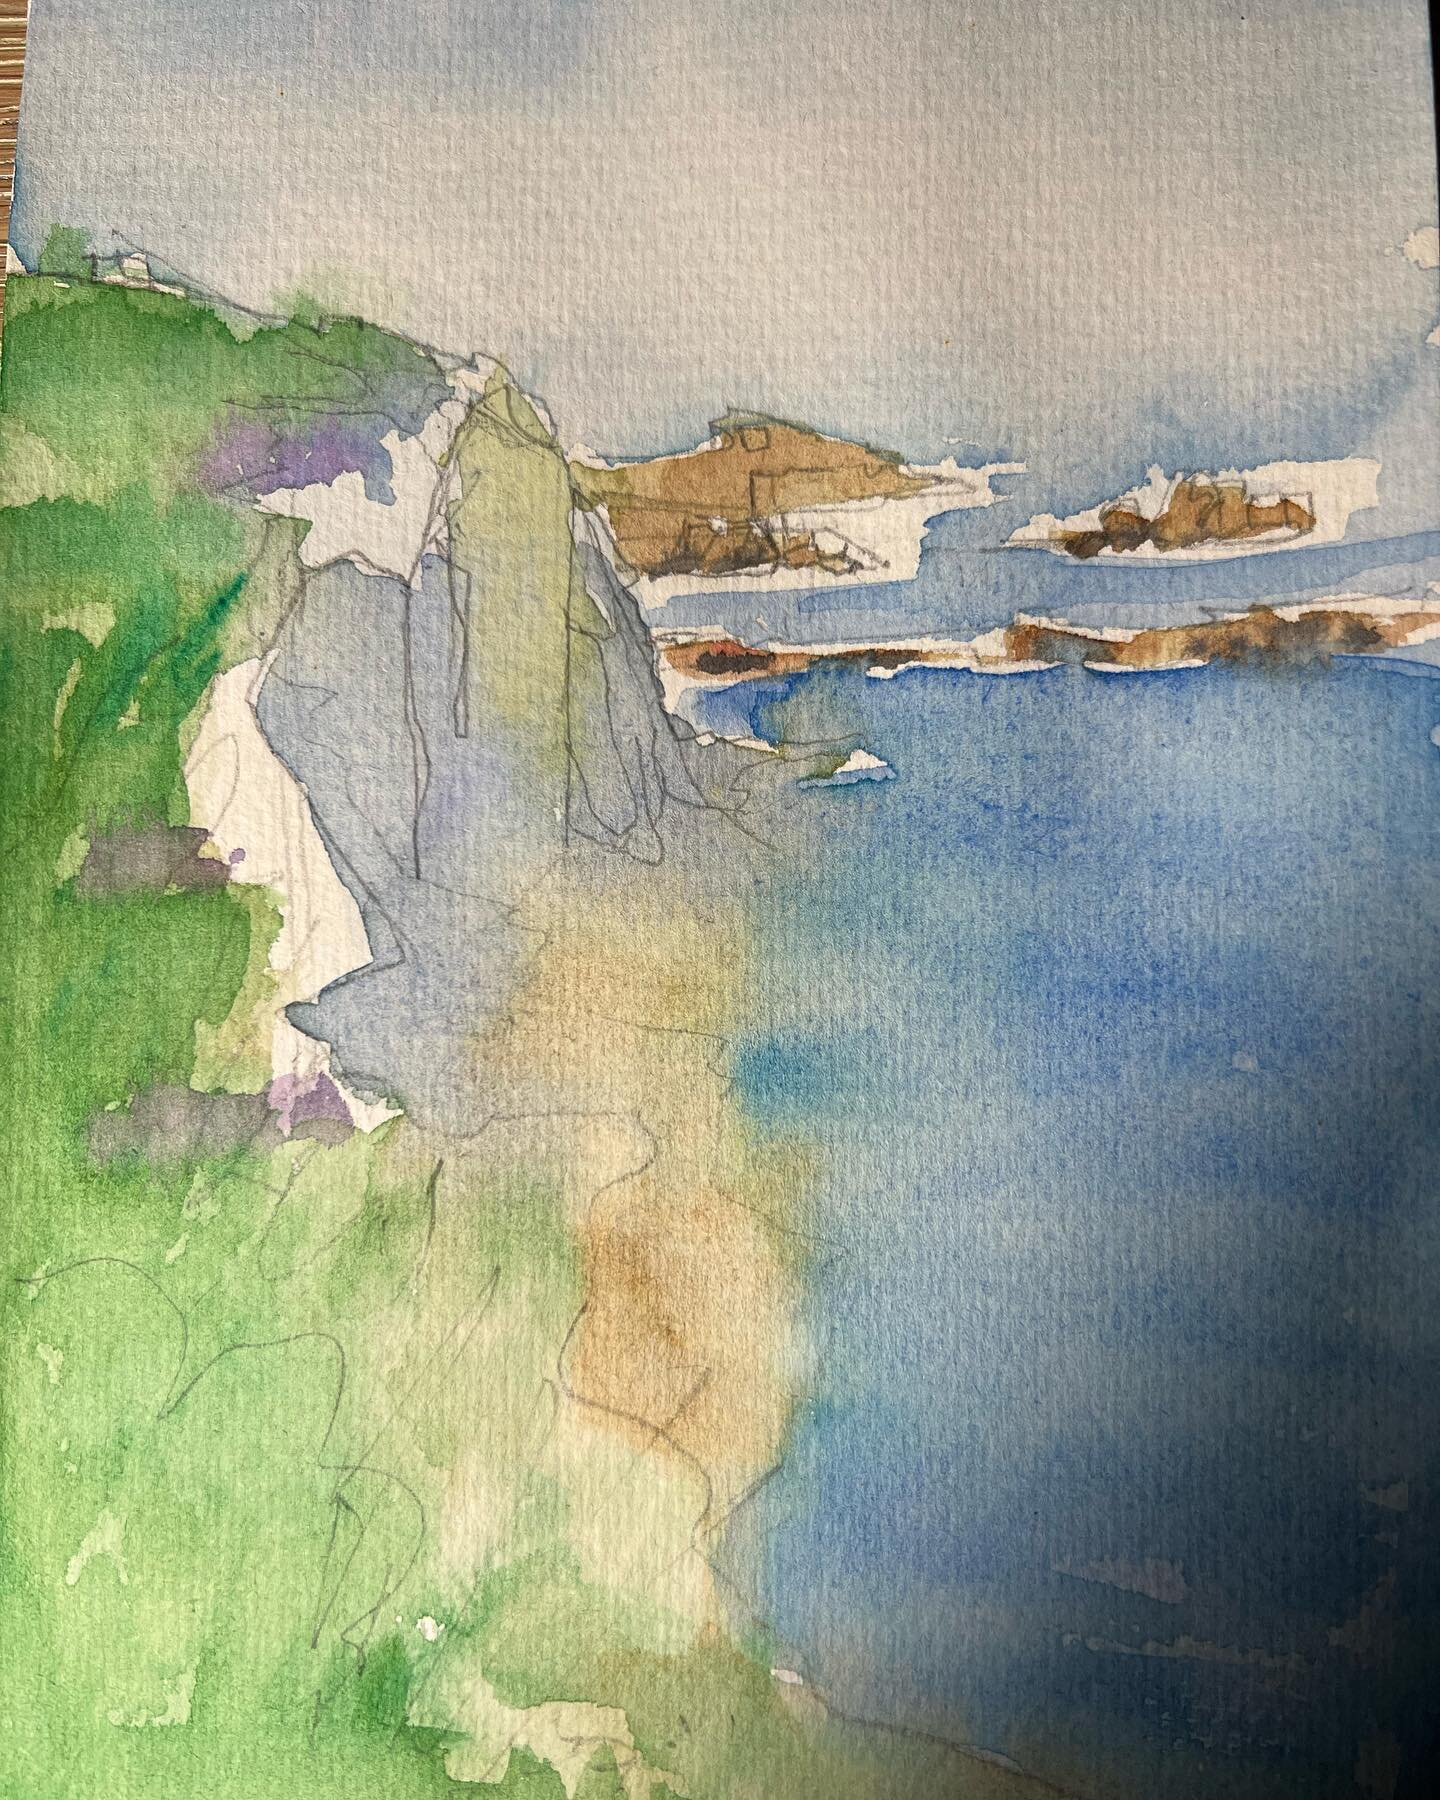 The work begins as a sketch to find the composition&hellip;.to get to the end result 🏊&zwj;♀️
.
.
.

#watercolour
#watercolor
#watercolourpainting
#watercoloursocietyofireland
#shirleygiffney
#irishart
#irishartist
#irishwatercolourartist
#irisharti